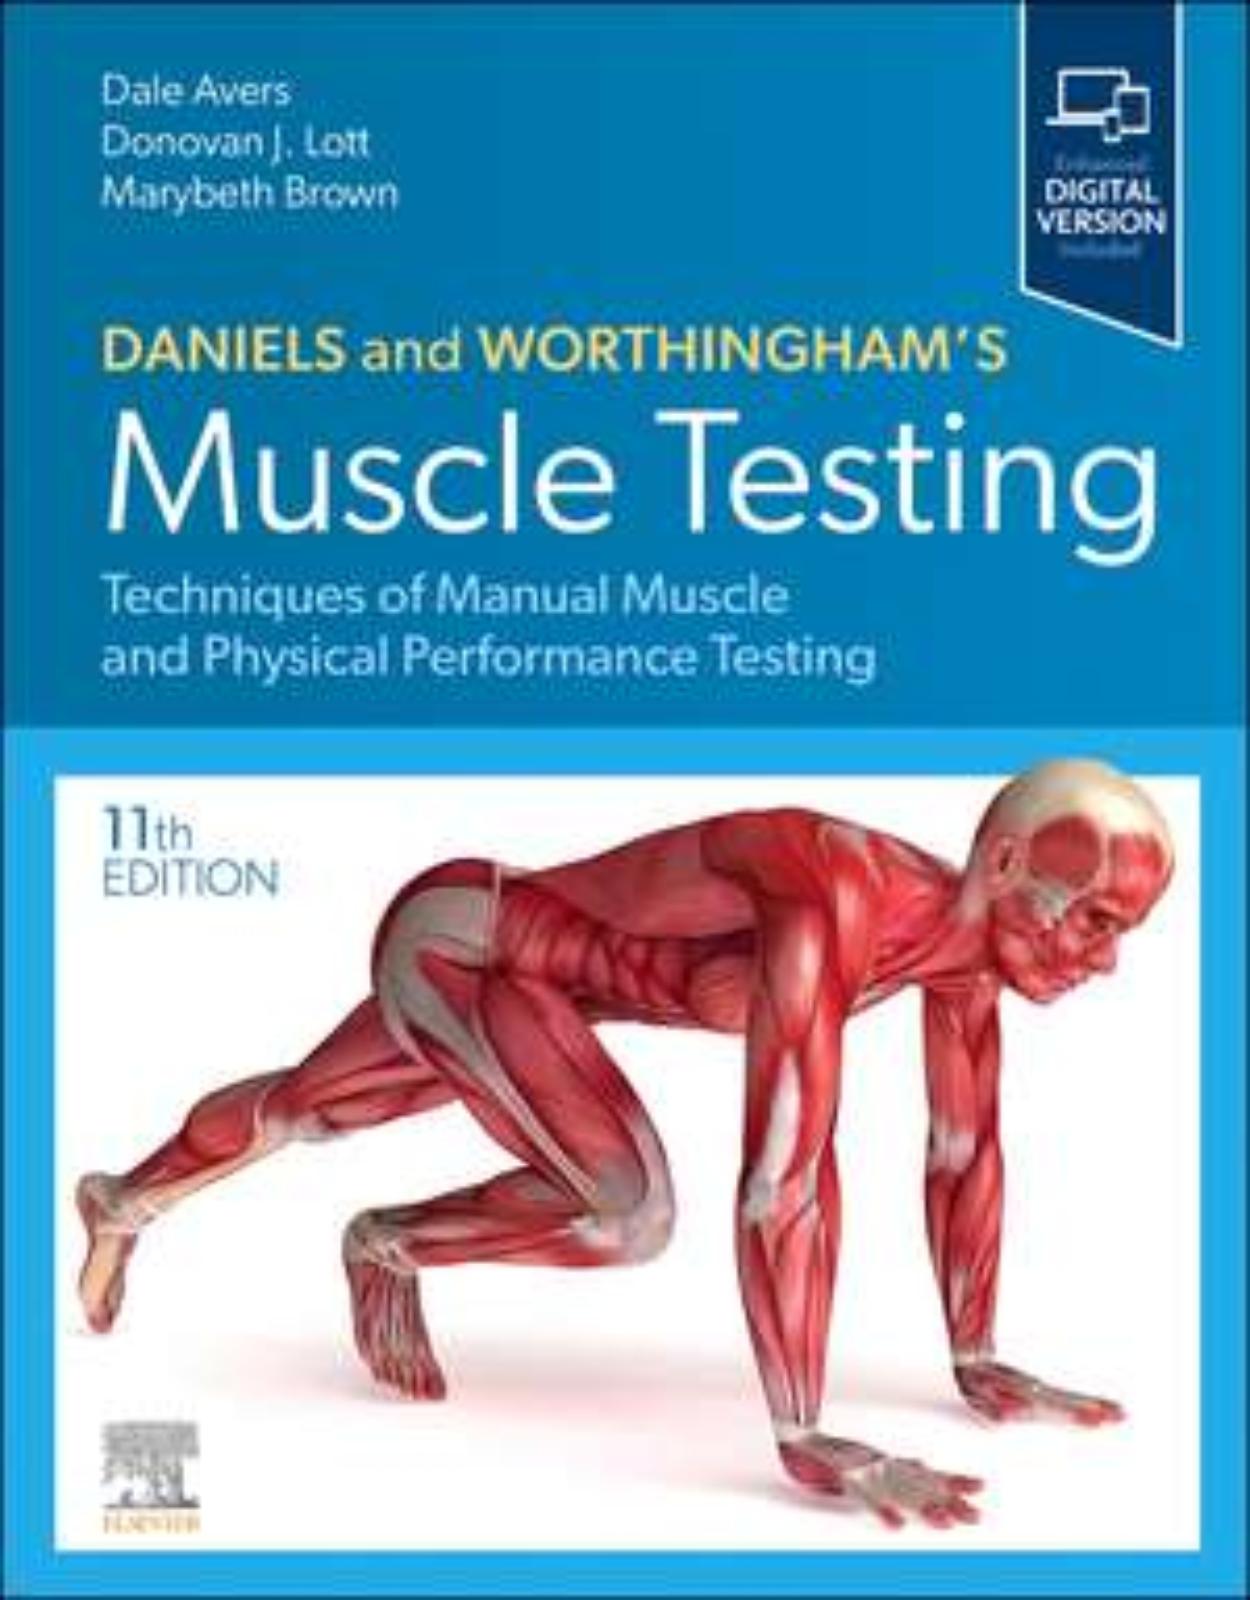 Daniels and Worthingham’s Muscle Testing, 11th Edition